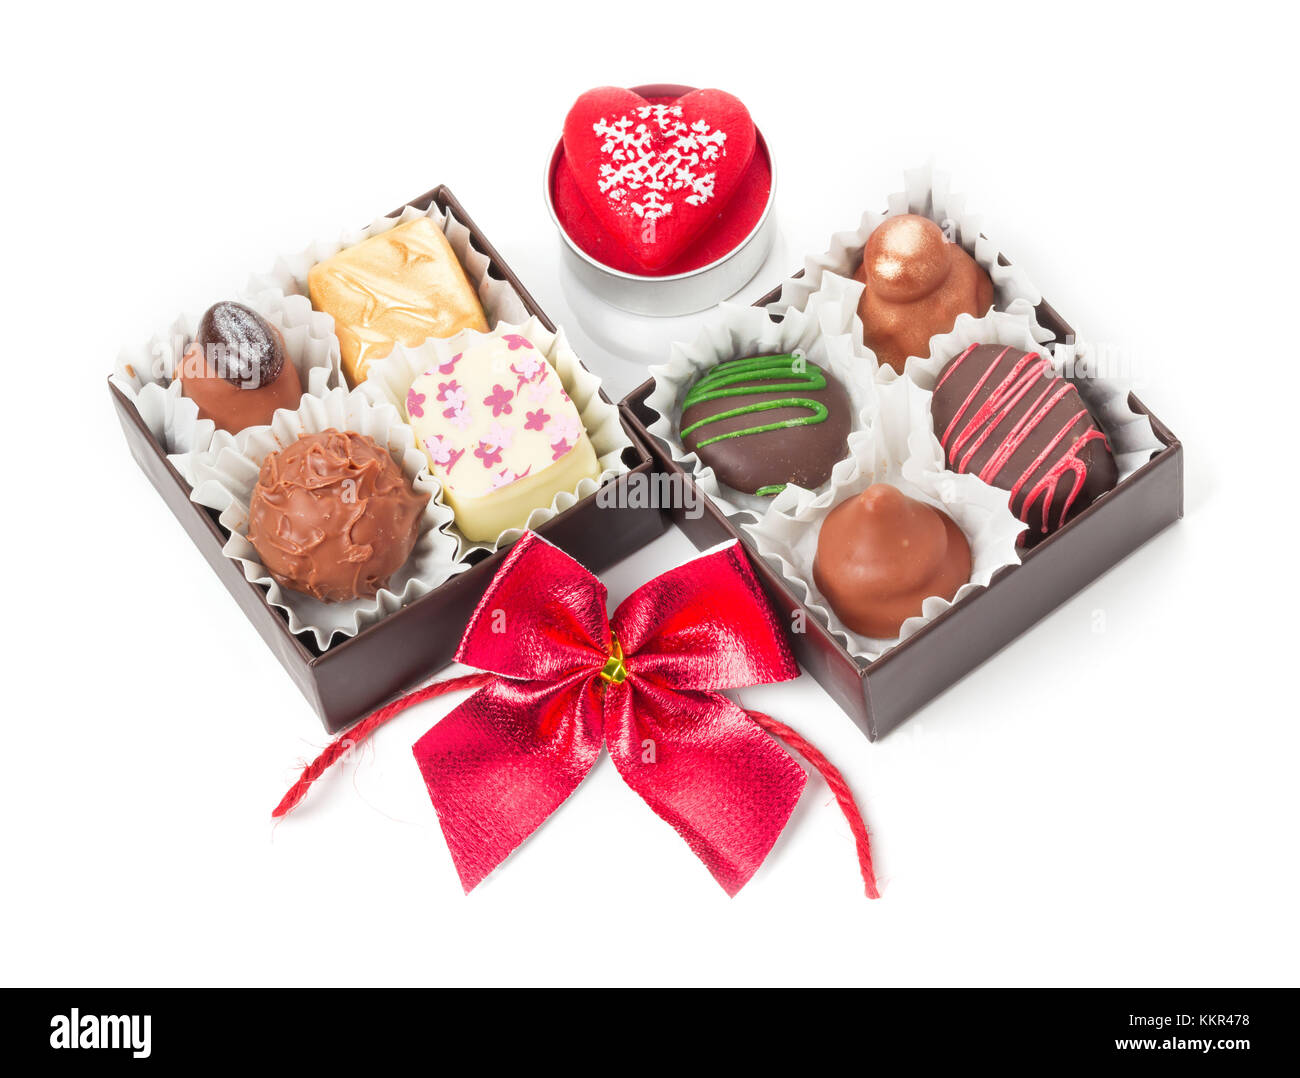 Candy, chocolates for Valentine's Day Stock Photo